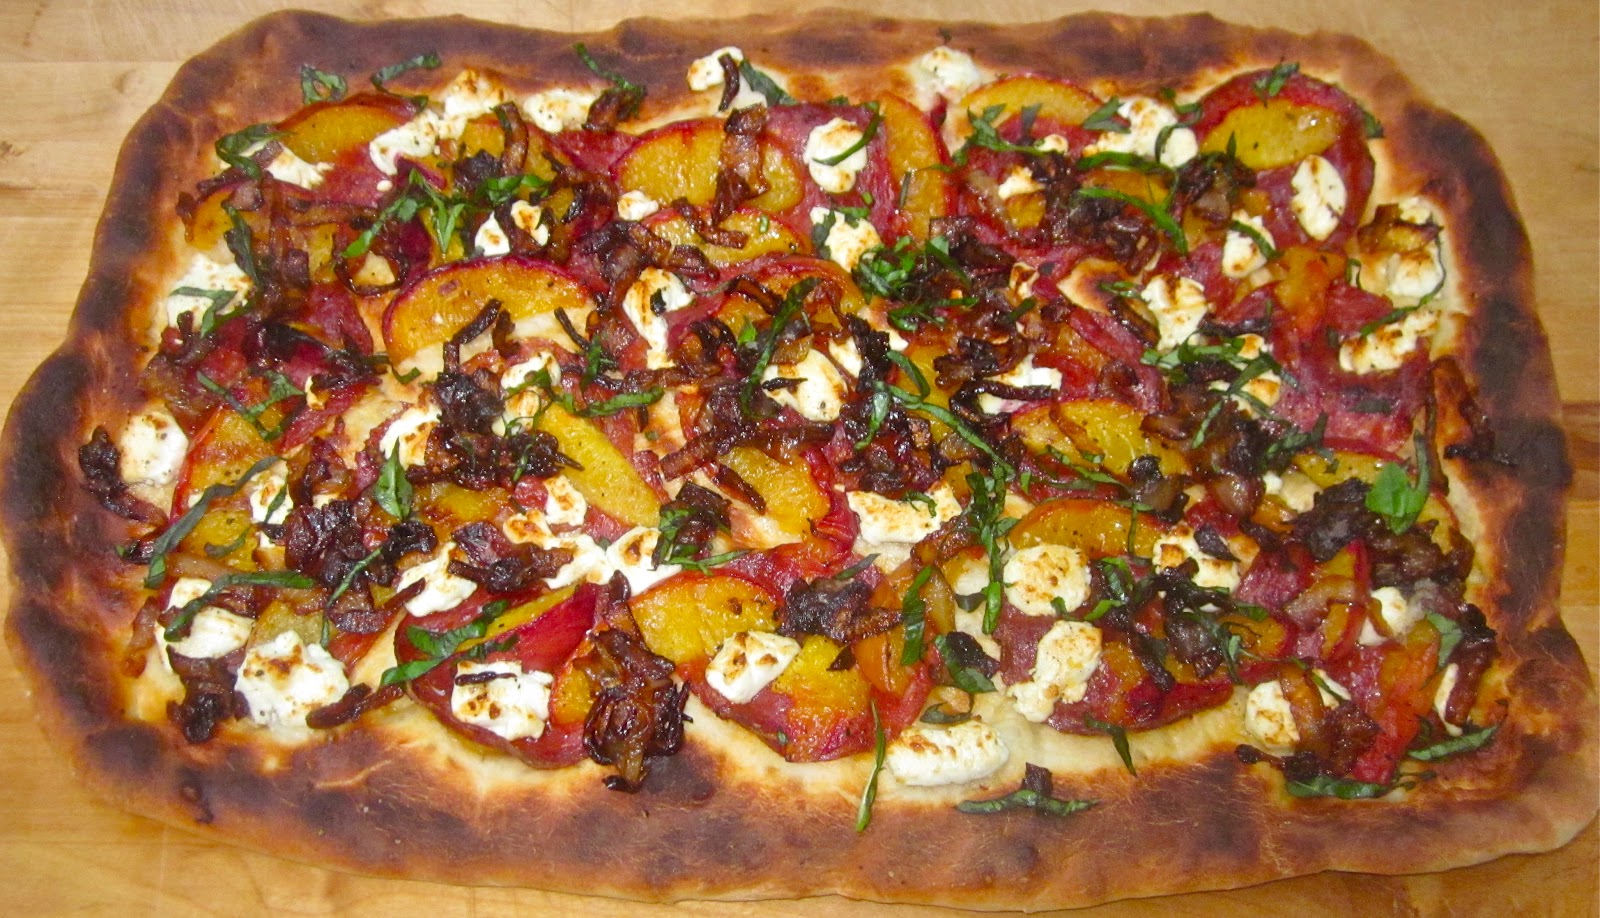 Spicy Chorizo Pizza with Caramelized Onions, Goat Cheese